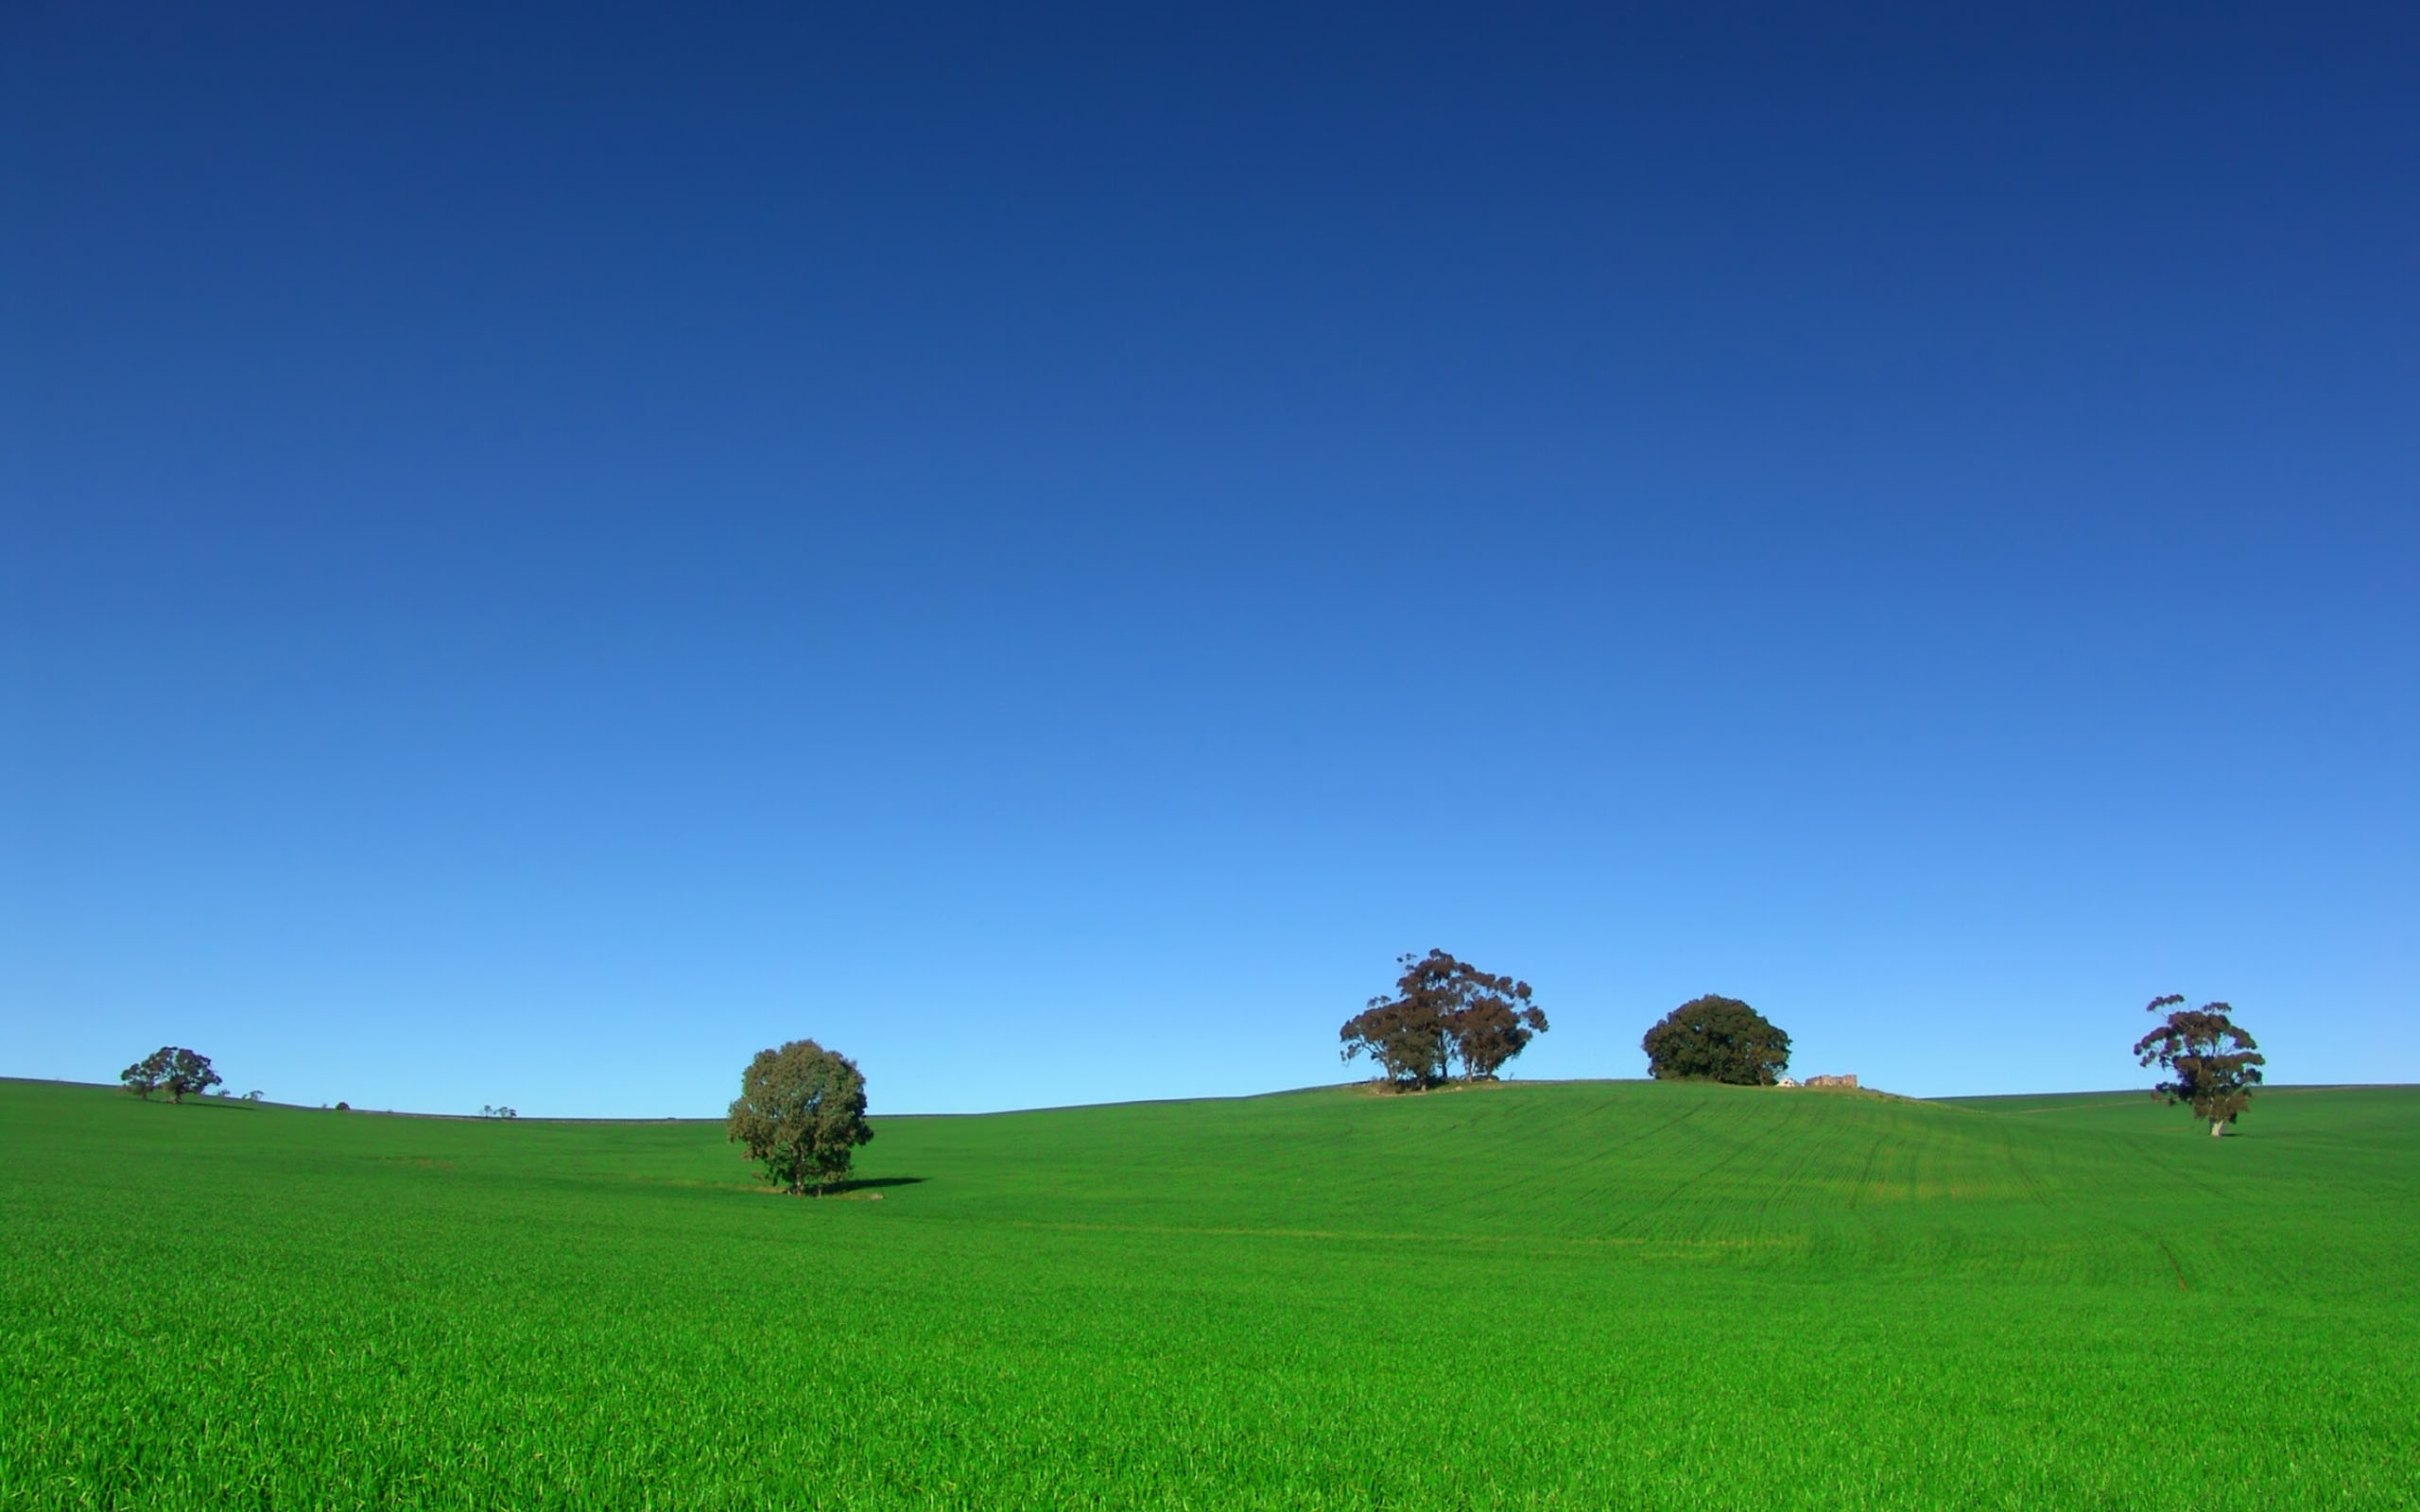 Grassland: Unspoiled area, Secluded spot, Remote place, Grazing land, Horizon. 2560x1600 HD Wallpaper.